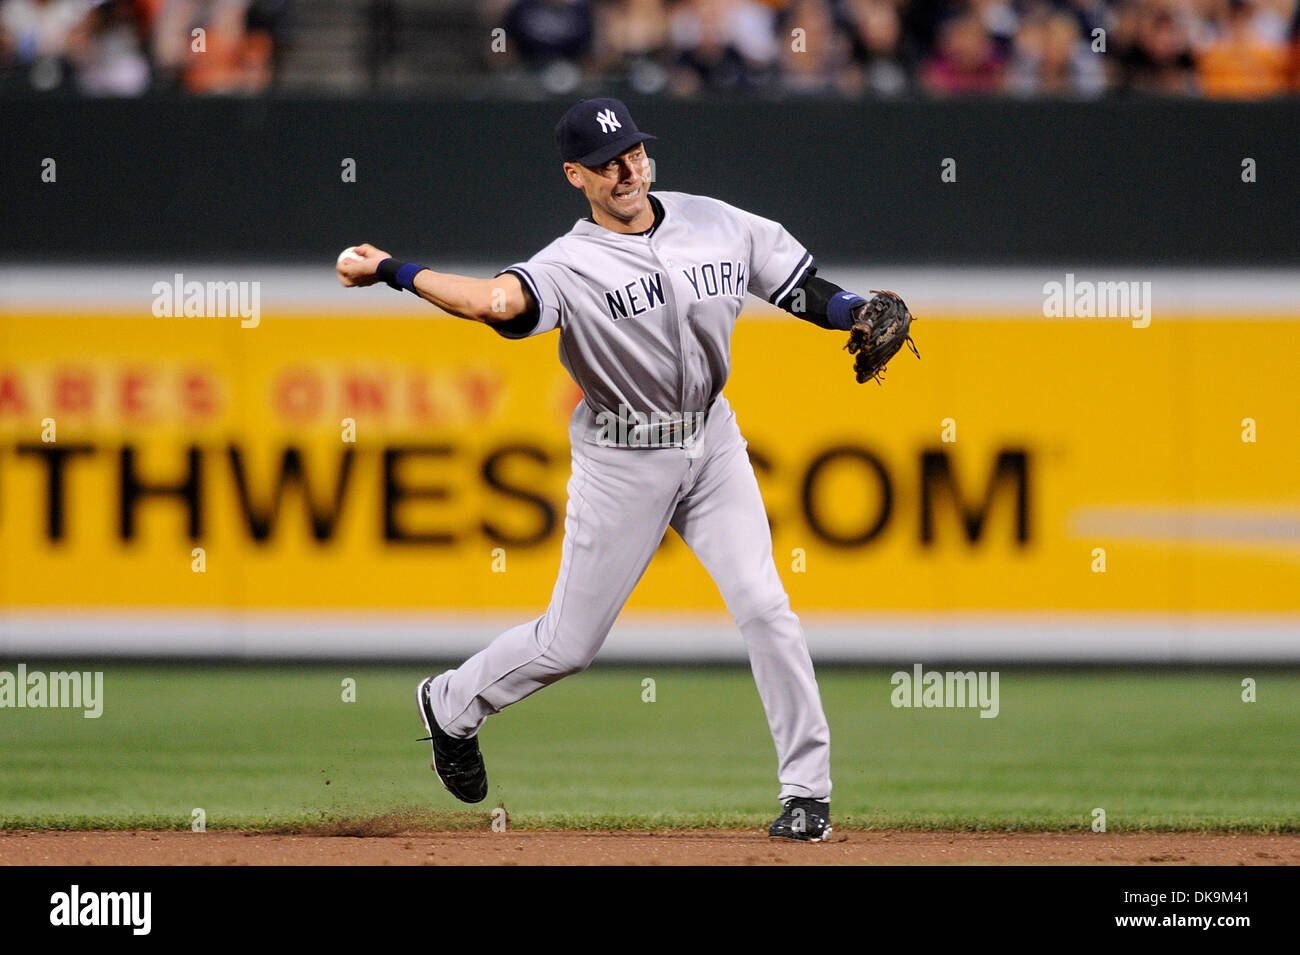 Aug. 26, 2011 - Baltimore, Maryland, U.S - New York Yankees Infielder Derek Jeter  (2) throws to first during a game between the New York Yankees and the Baltimore Orioles, the Orioles lead 6-0 through 2 inning (Credit Image: © TJ Root/Southcreek Global/ZUMApress.com) Stock Photo